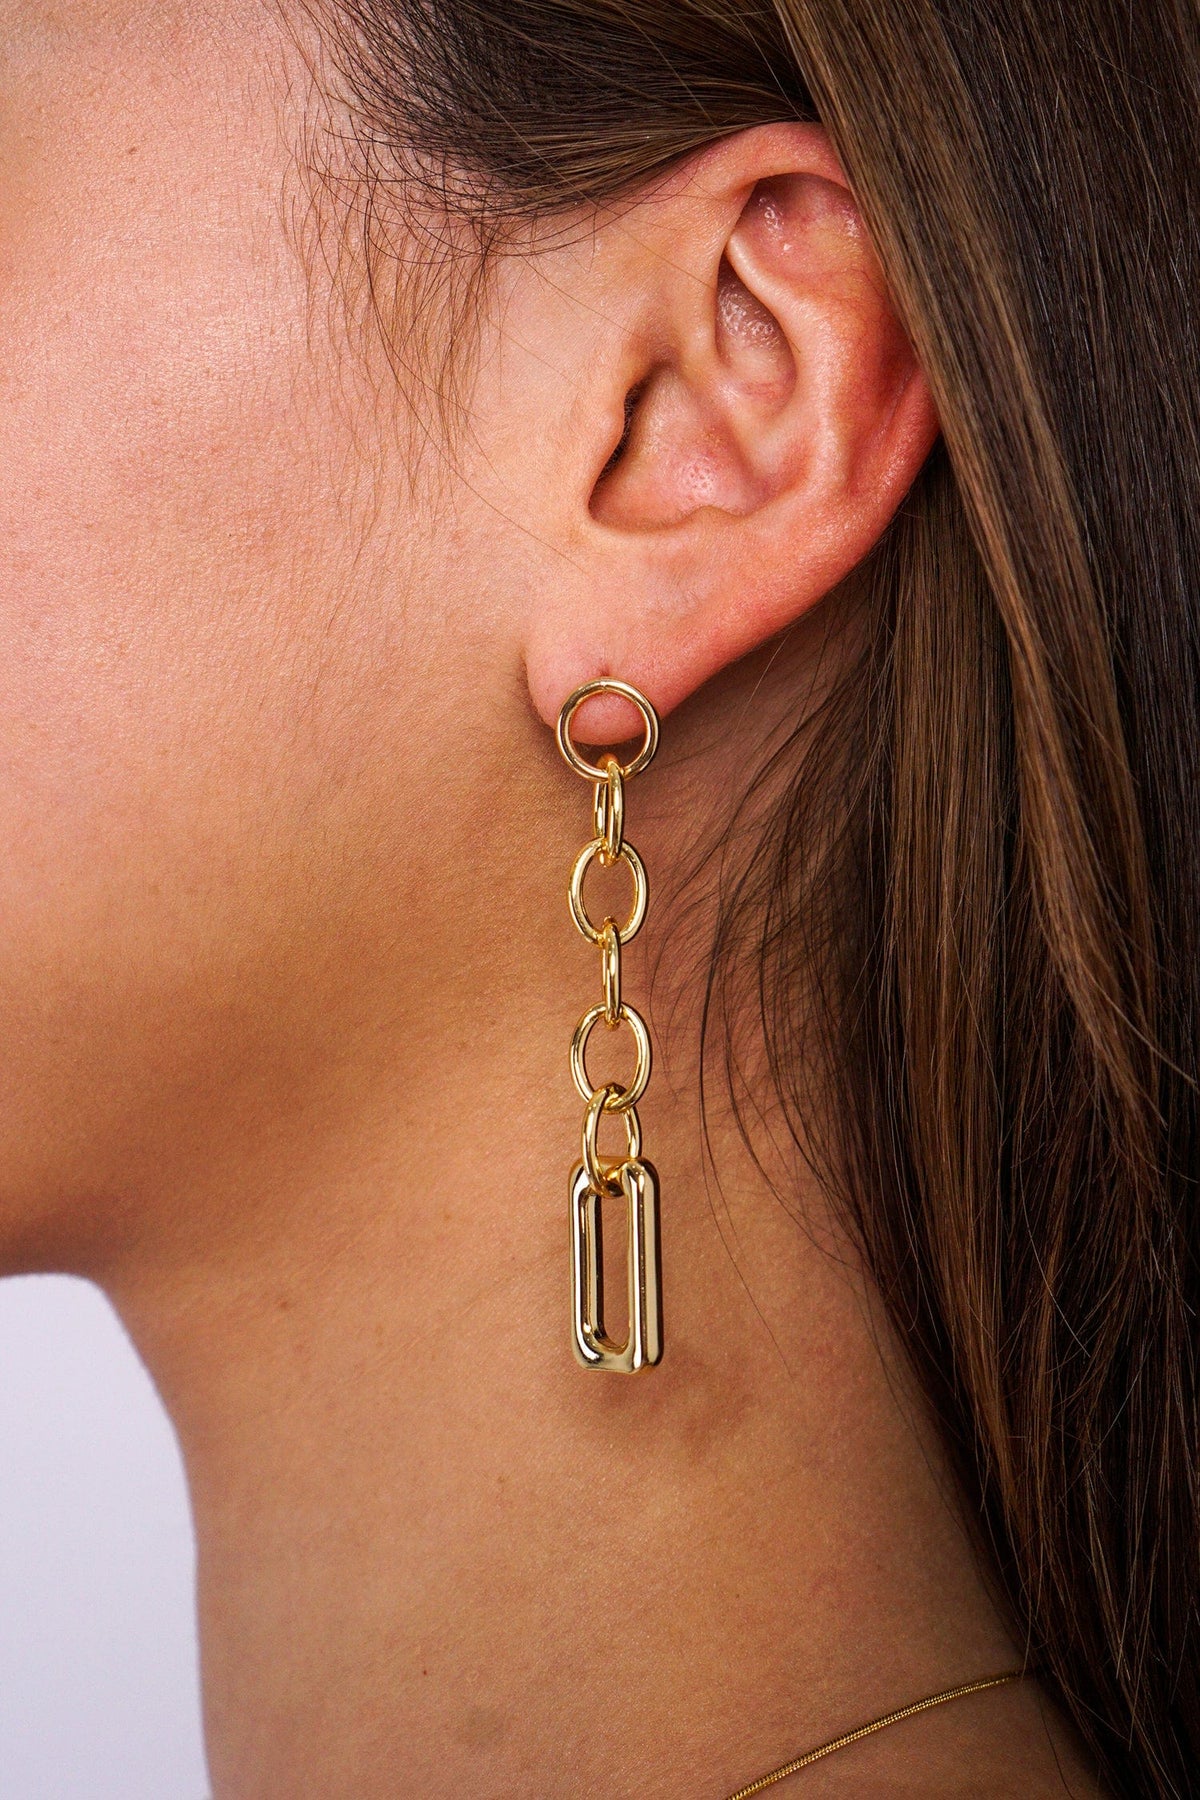 DCD EARRINGS 1 Gold Plated Over Brass Dangling Oval Chain With Rectangle Link Earrings